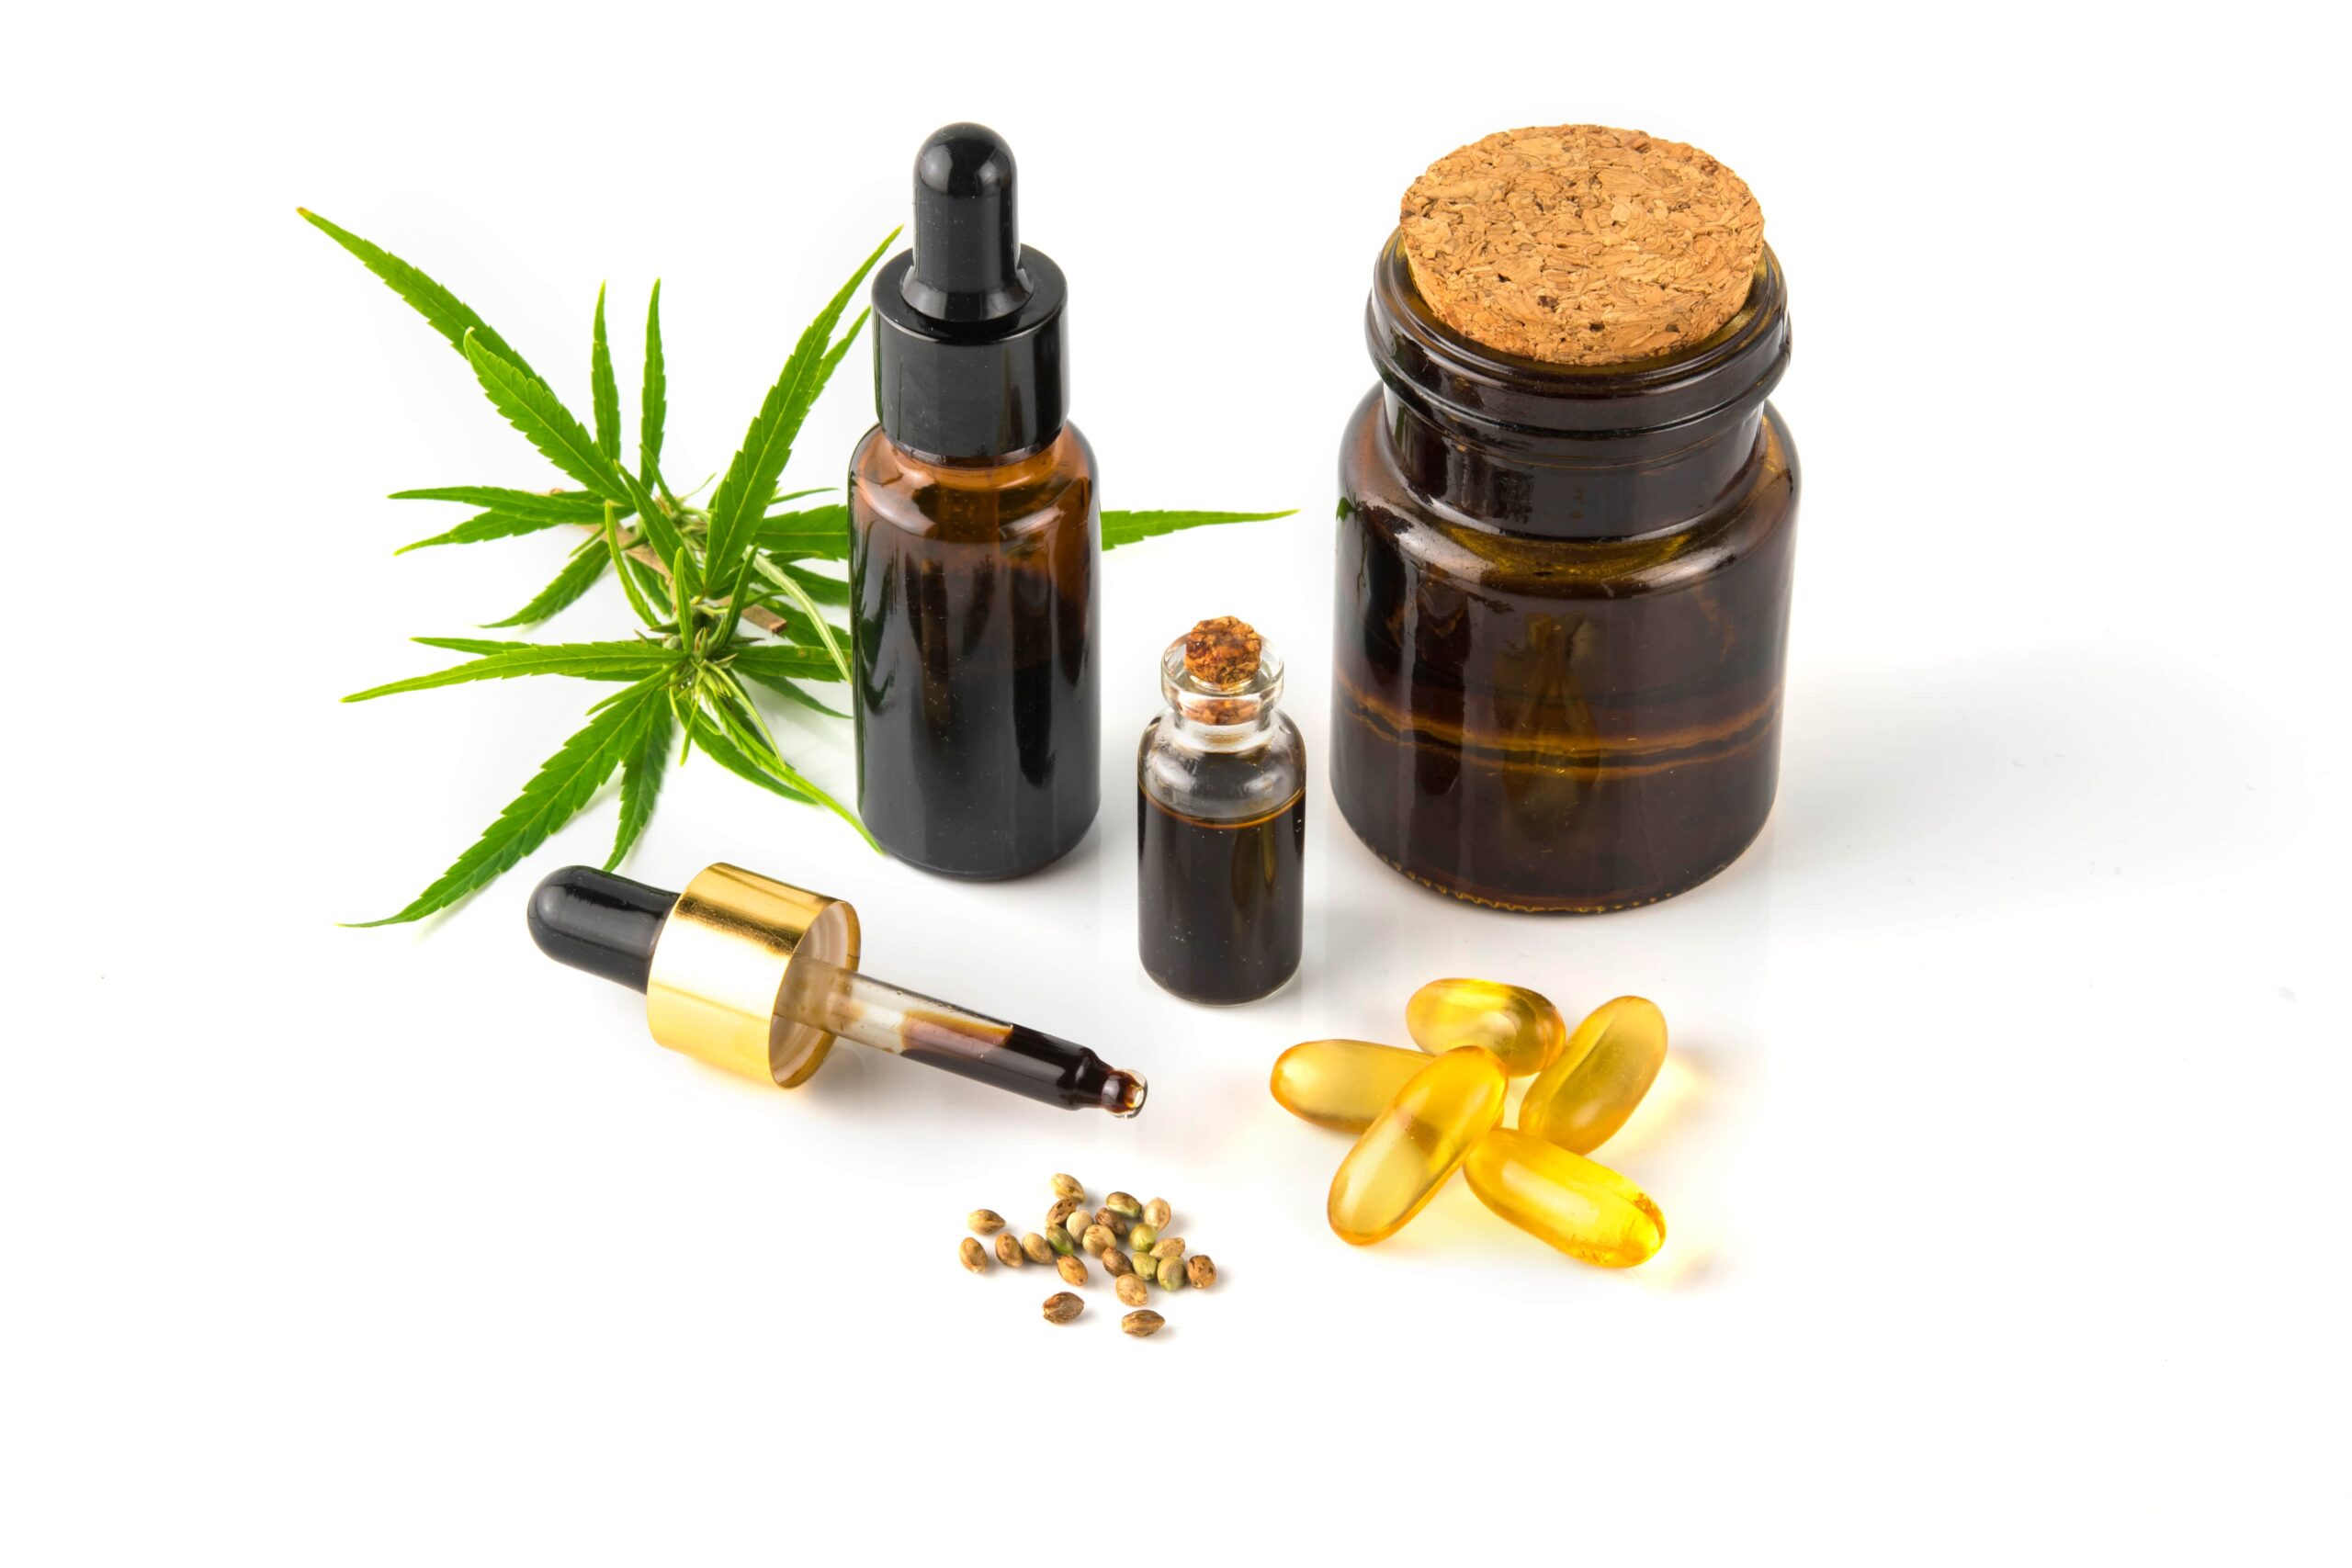 How Do CBD Oils & Different CBD Products Make You Feel